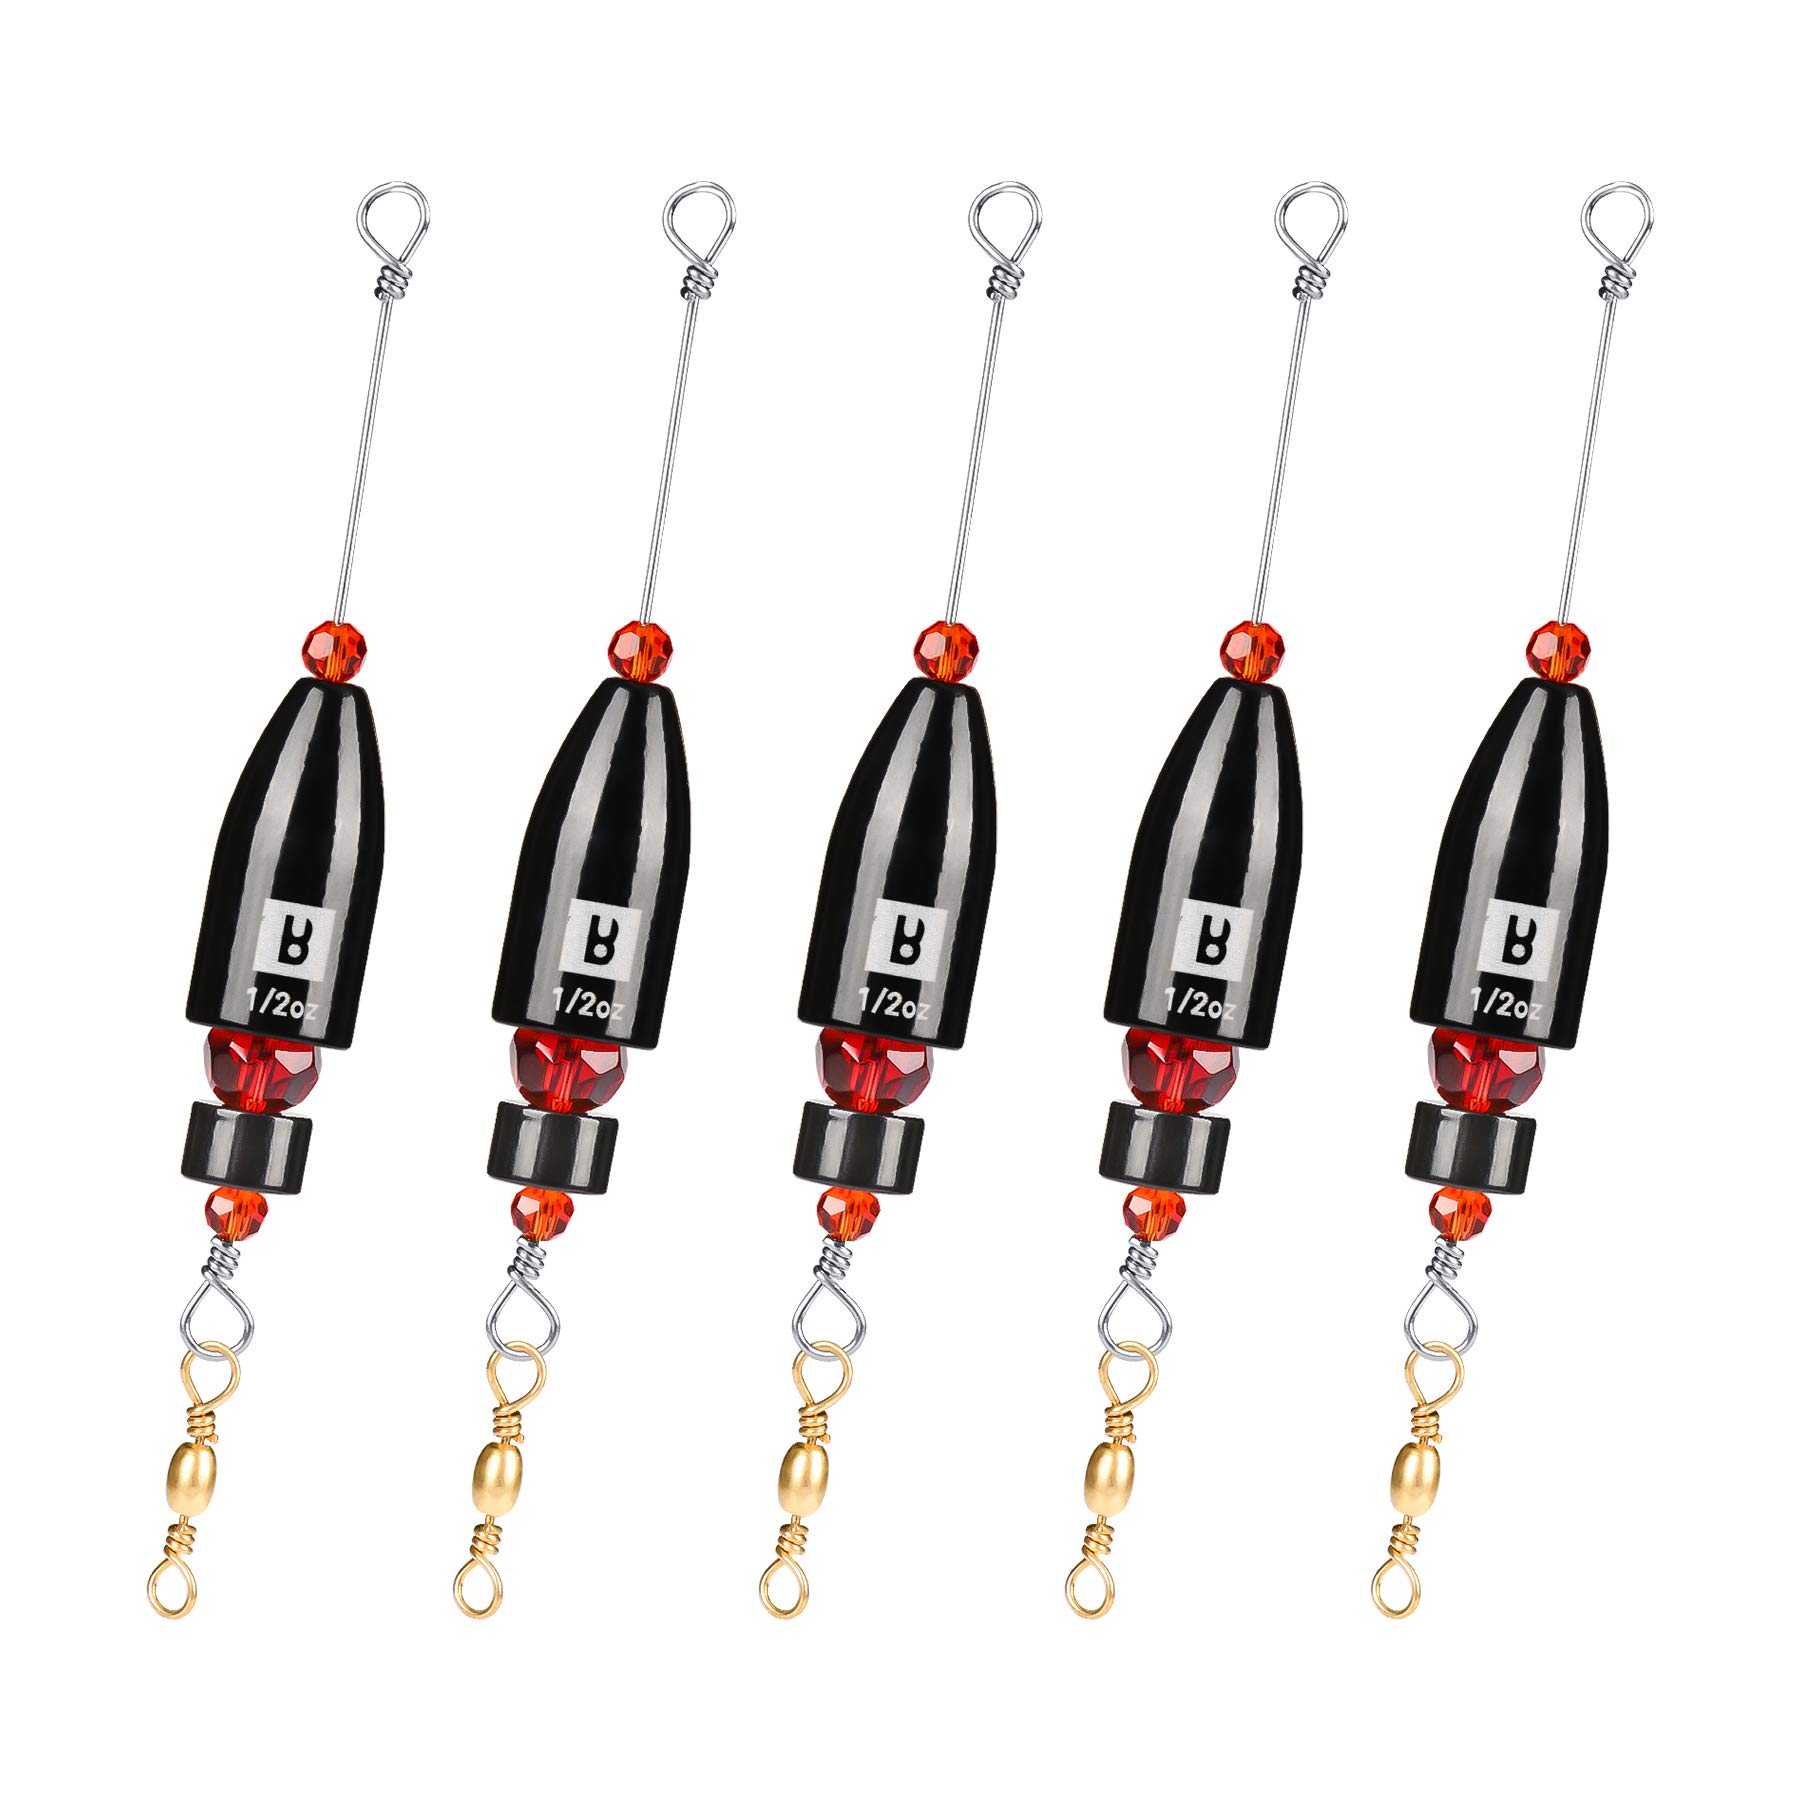 Texas Rig for Bass Fishing,5pieces in 1 Packs Complete Texas Carolina Rig  Ready Rig,Free Rig Kit with Weight Hook Rigged Line Fishing Gear Accessories